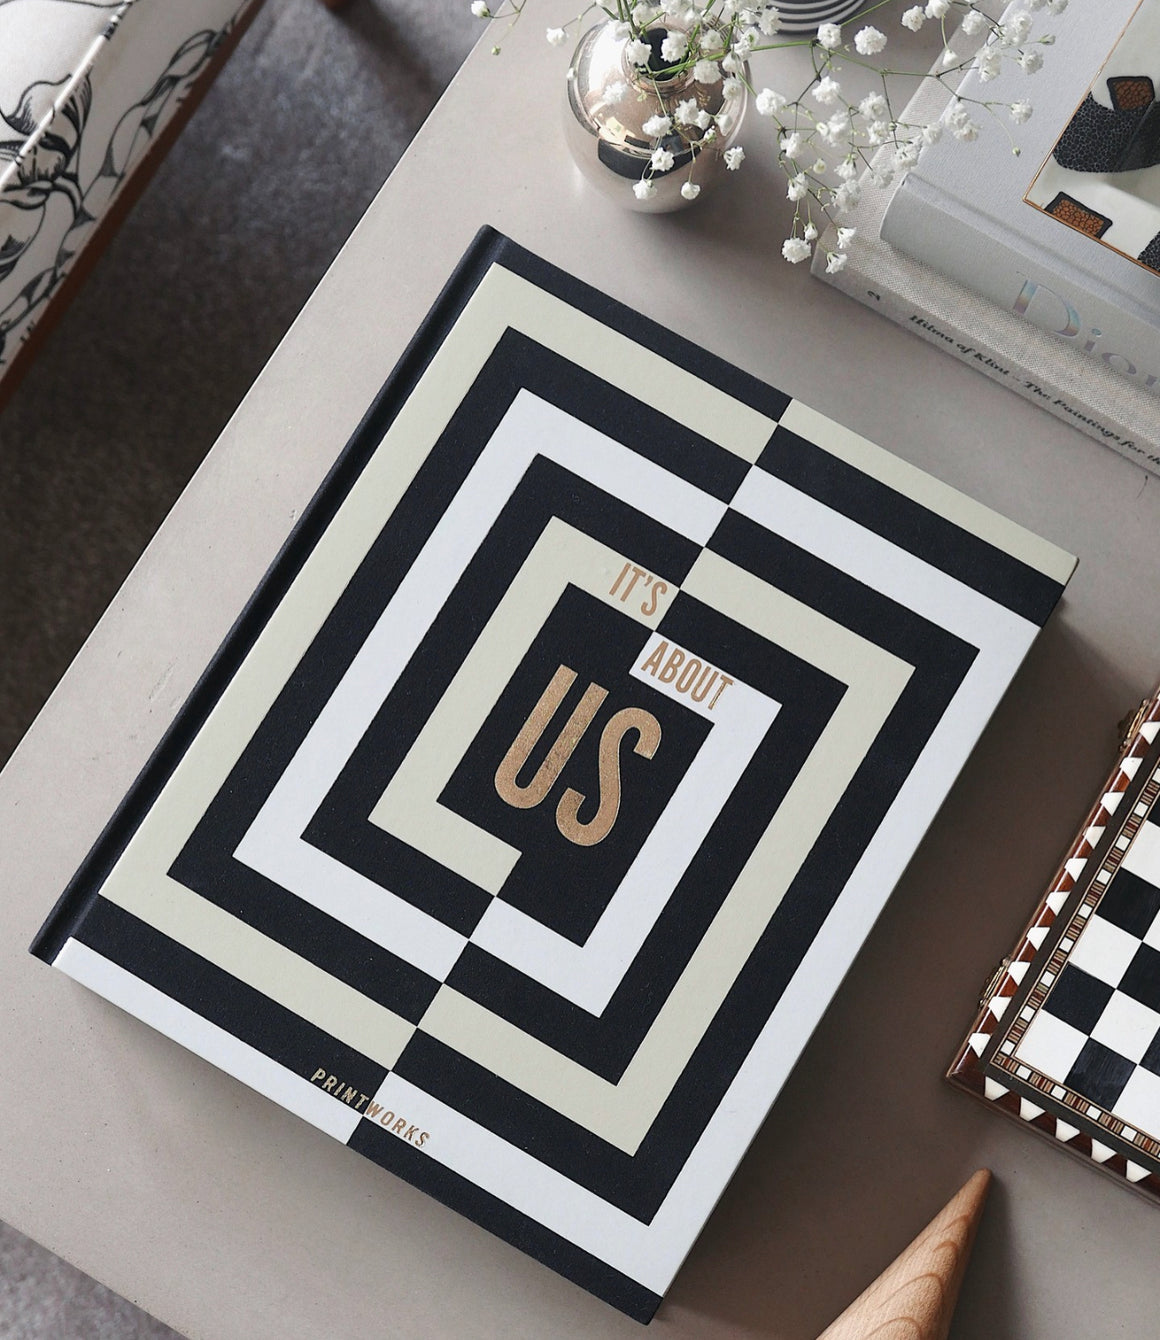 It's About Us Photo Album/Coffee Table Book